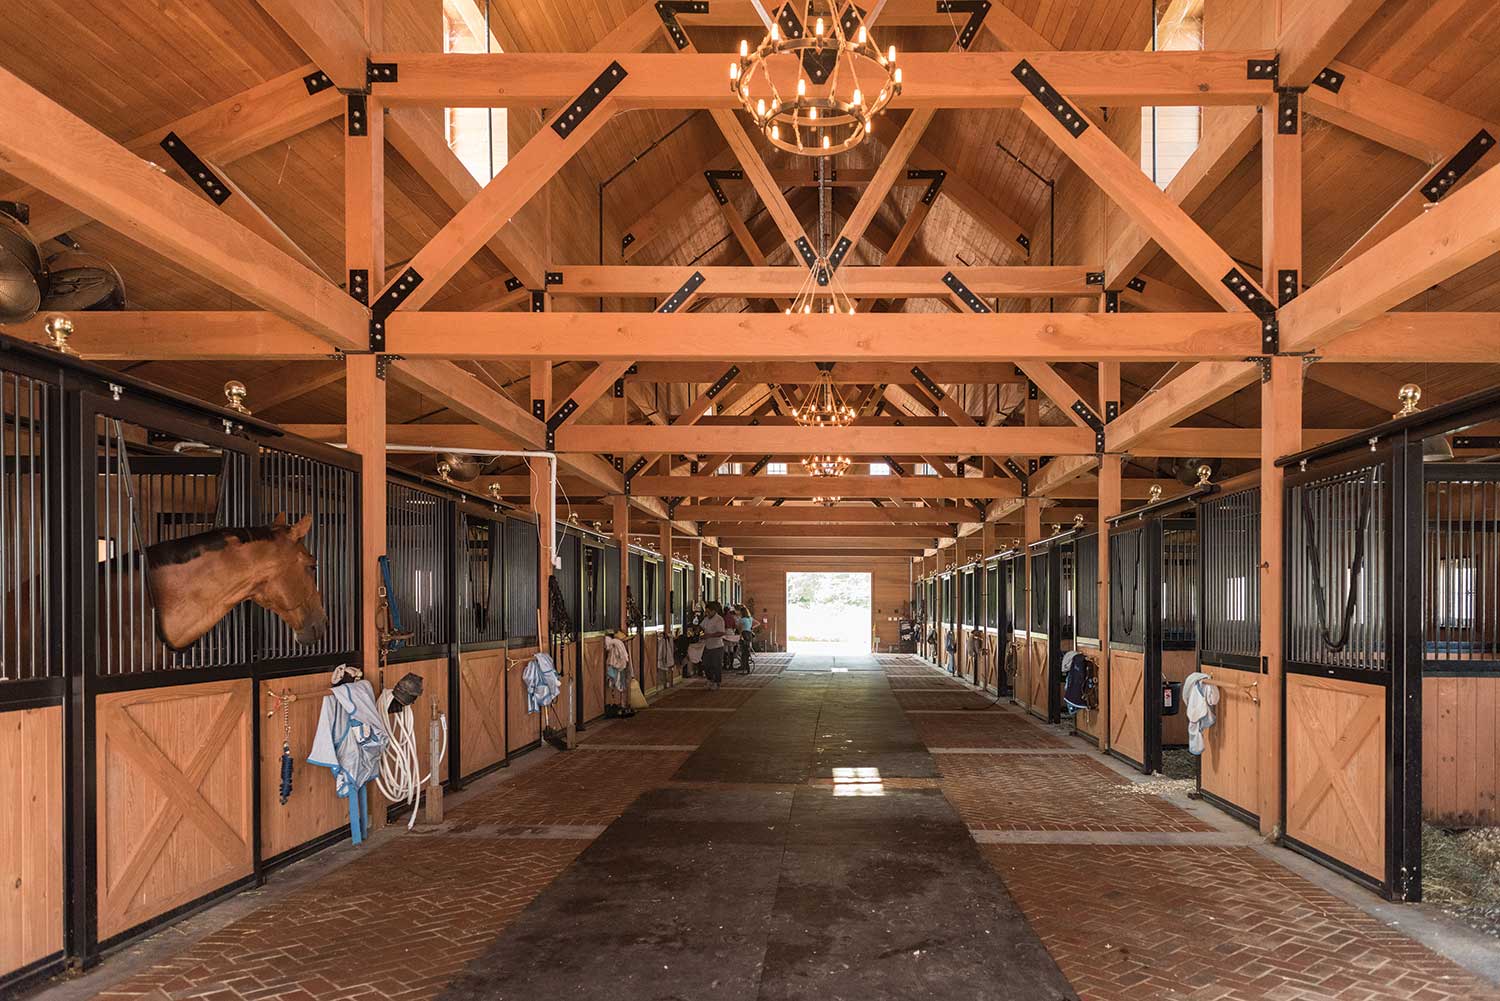 horse stables to visit near me